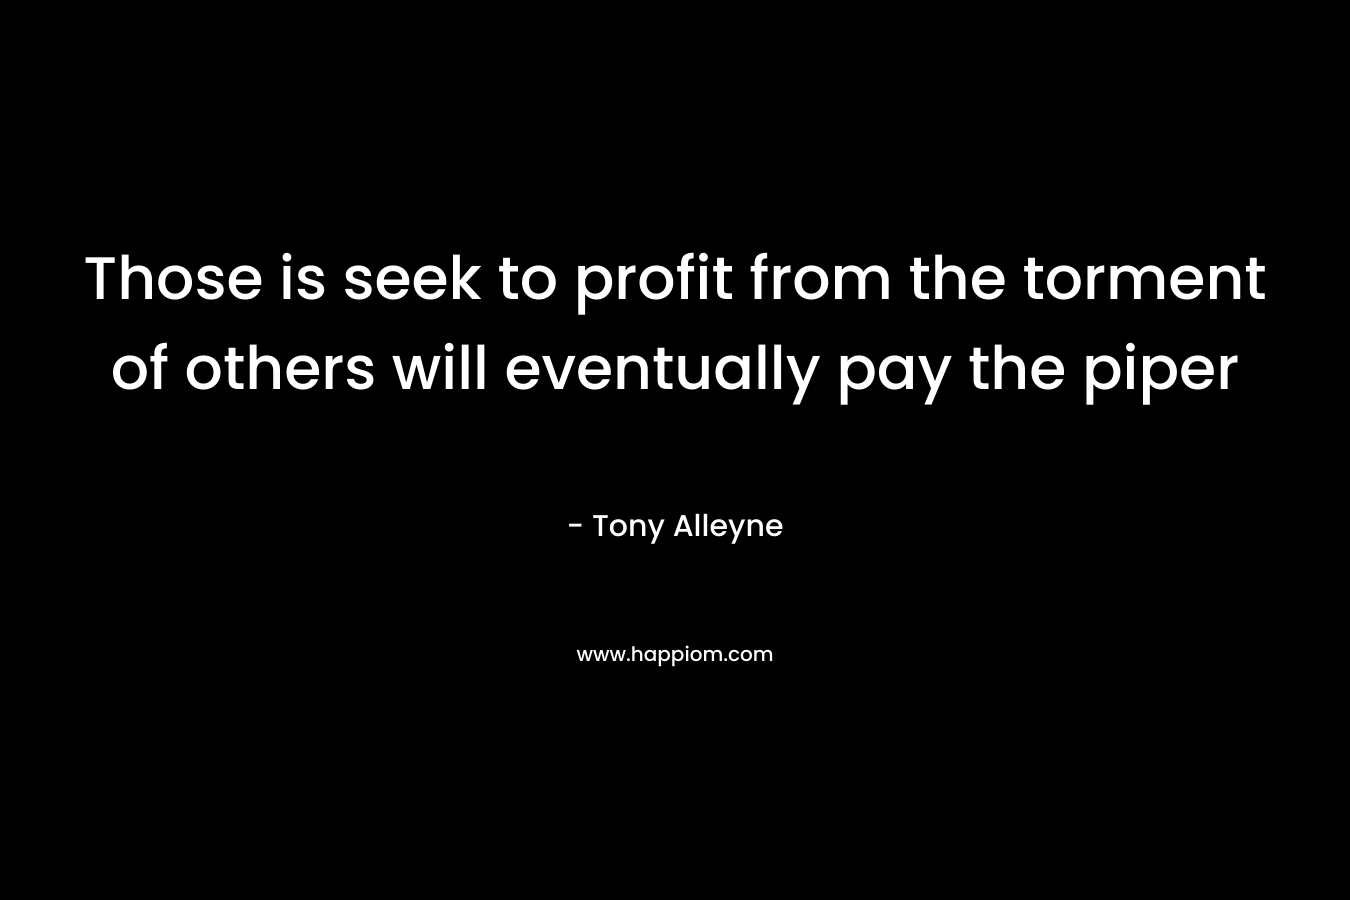 Those is seek to profit from the torment of others will eventually pay the piper – Tony Alleyne